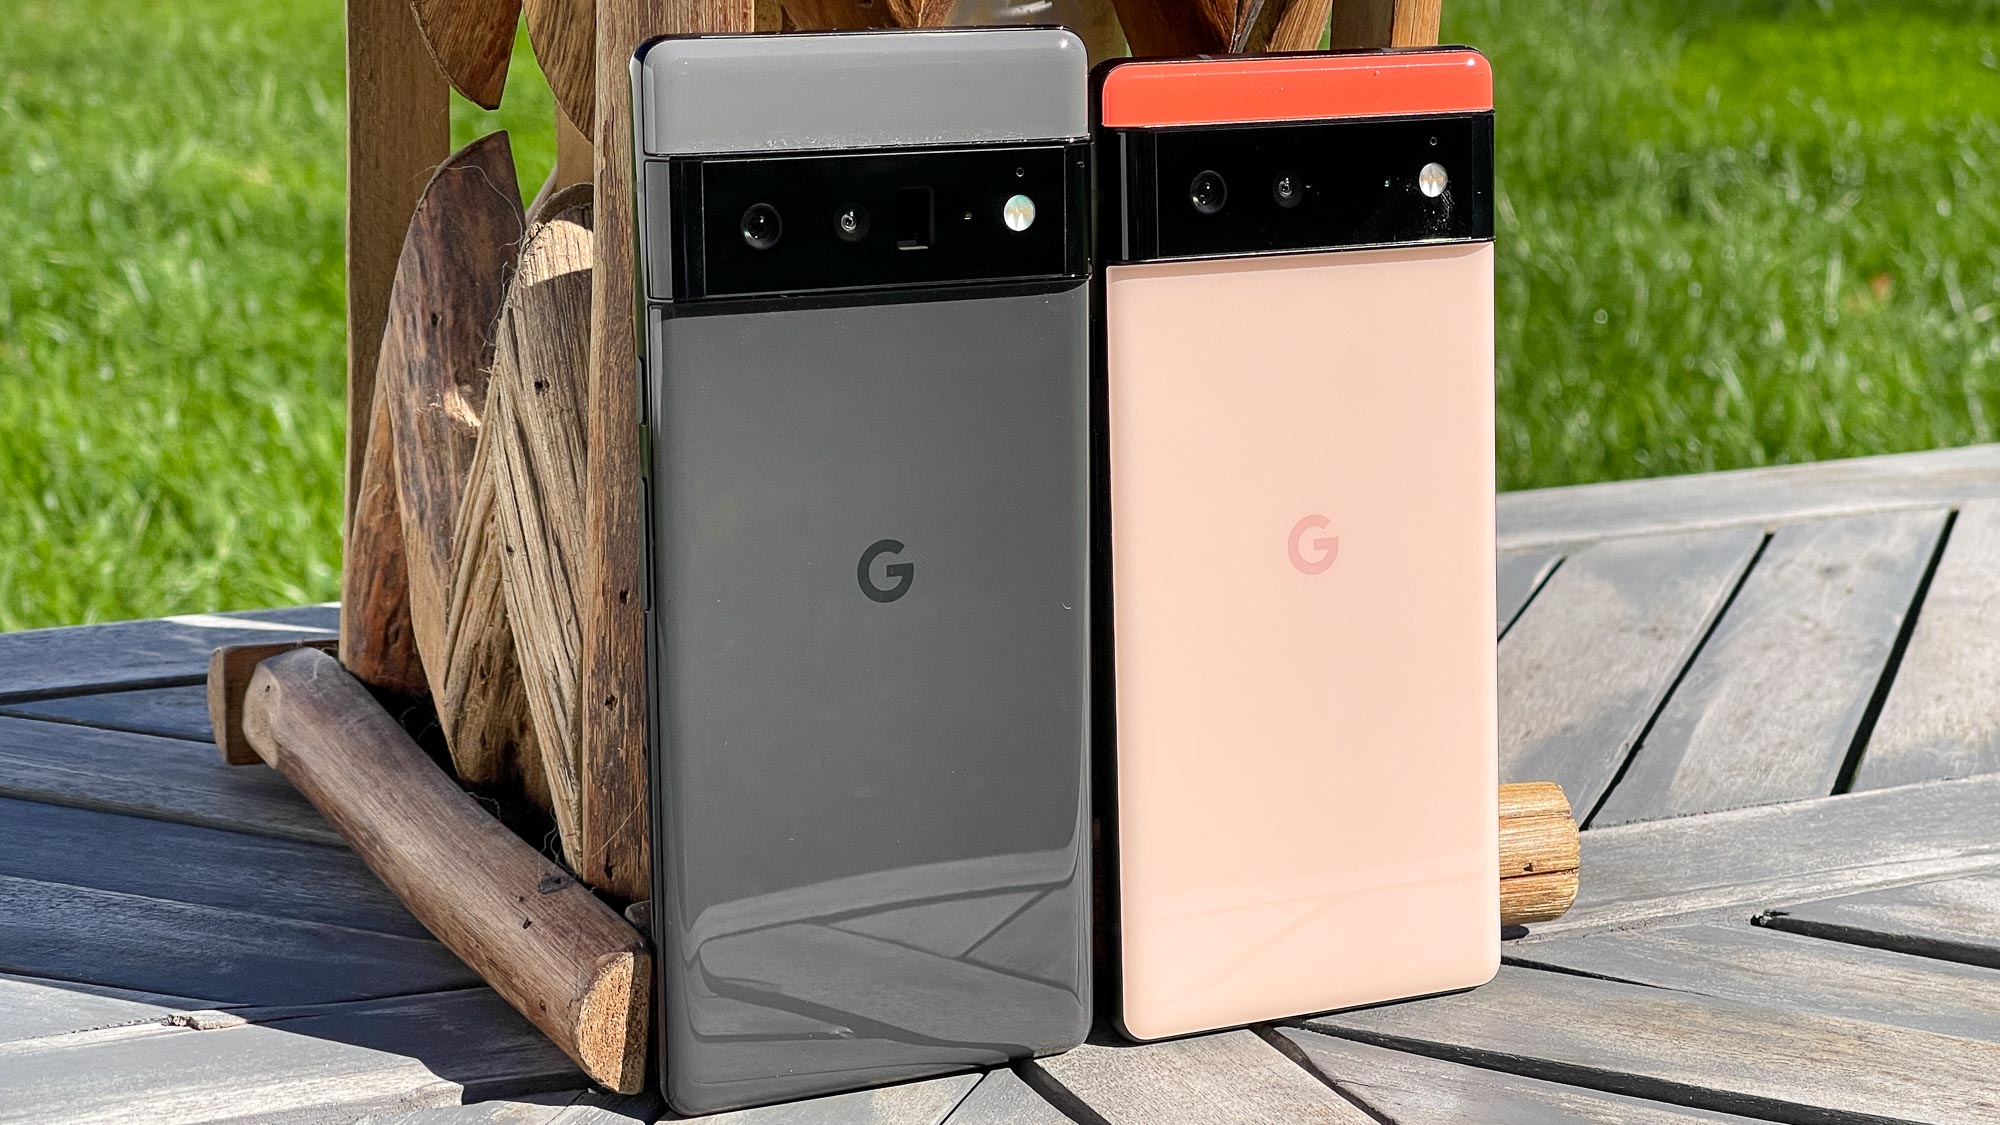 The Google 6 Pro (left, in black) and Google Pixel 6 (right, in coral), leaning together against a tree on wooden decking